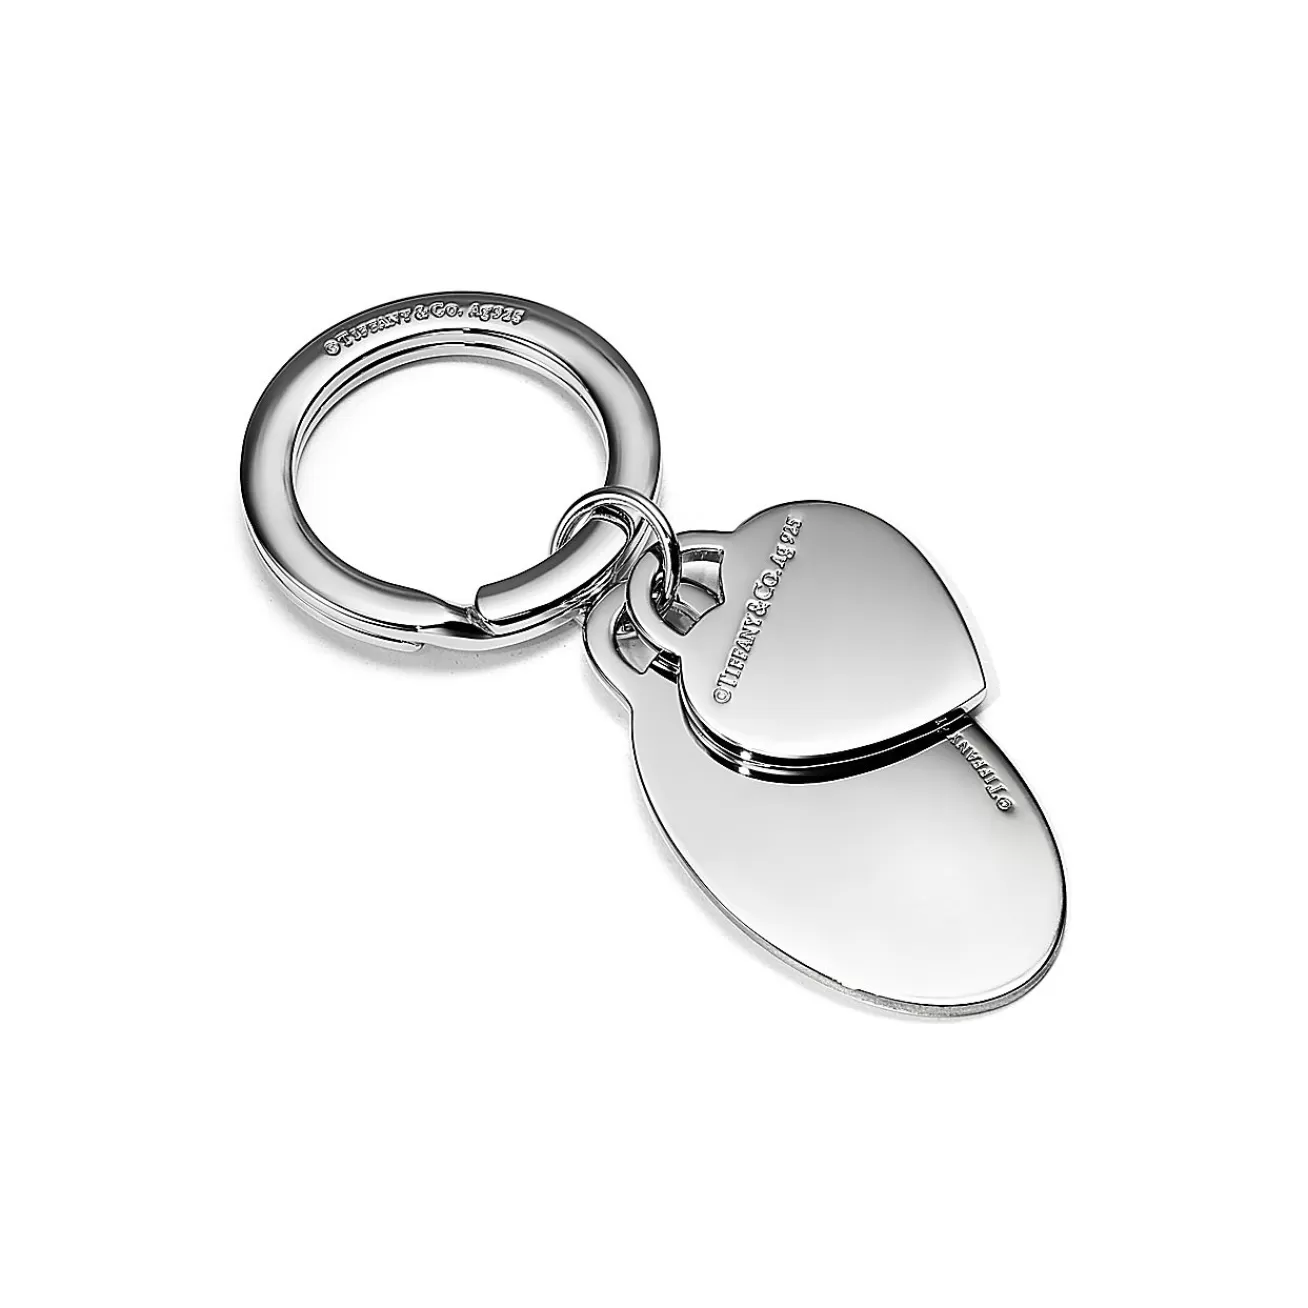 Tiffany & Co. Return to Tiffany® Oval and Heart Tag Key Ring in Silver with Tiffany Blue® | ^Women Tiffany Blue® Gifts | Key Rings